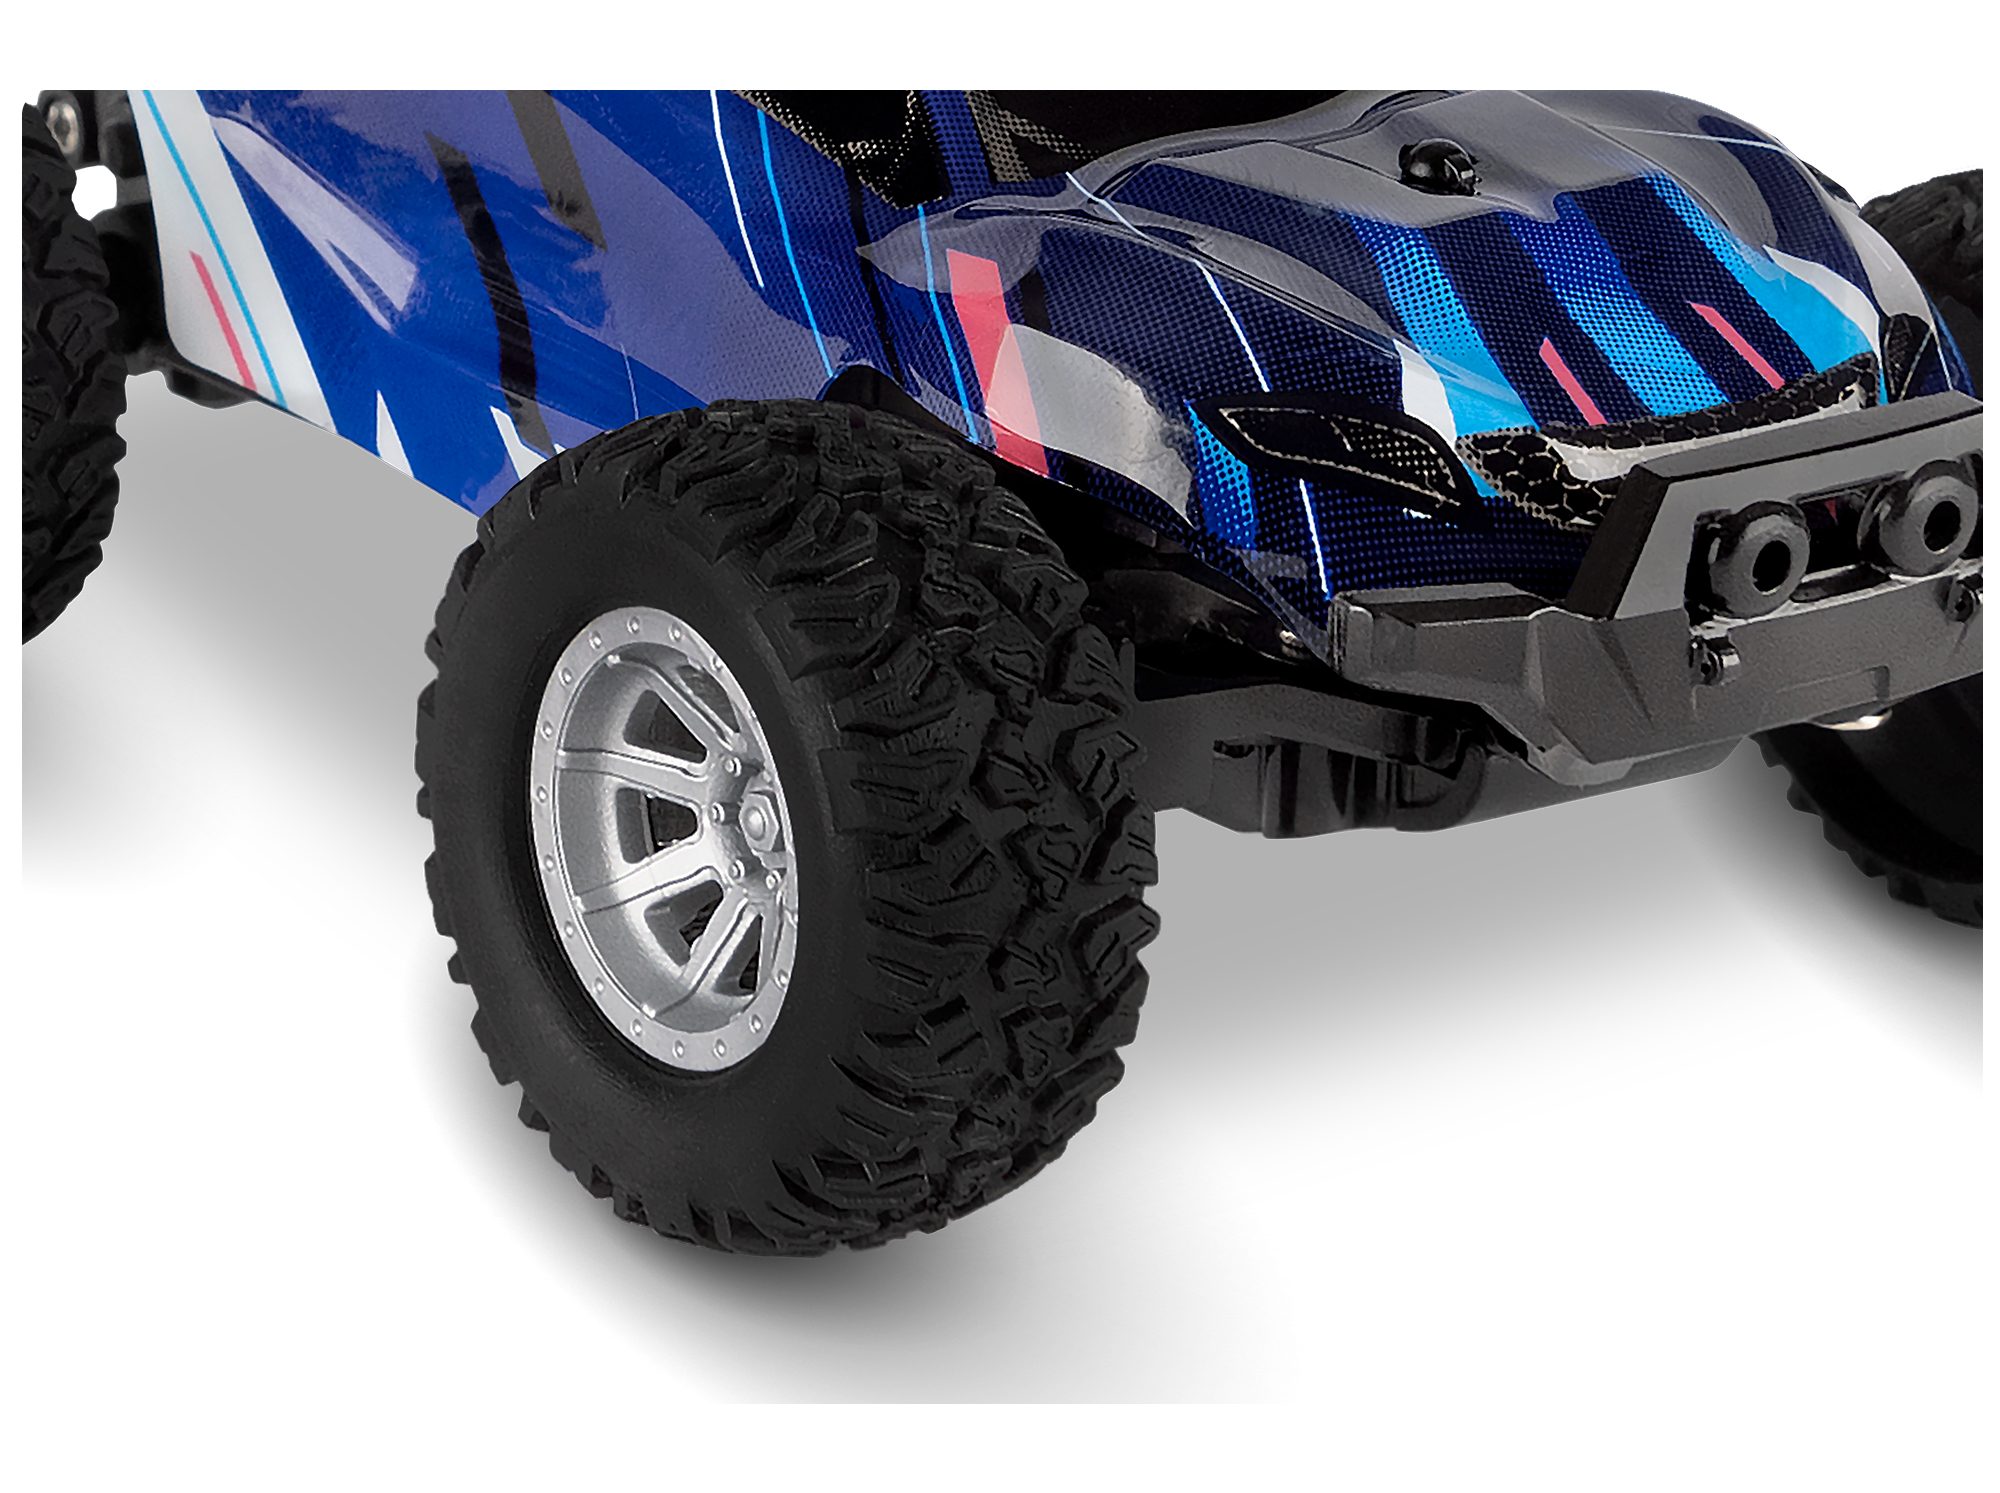 Overmax X-Quest — RC cars